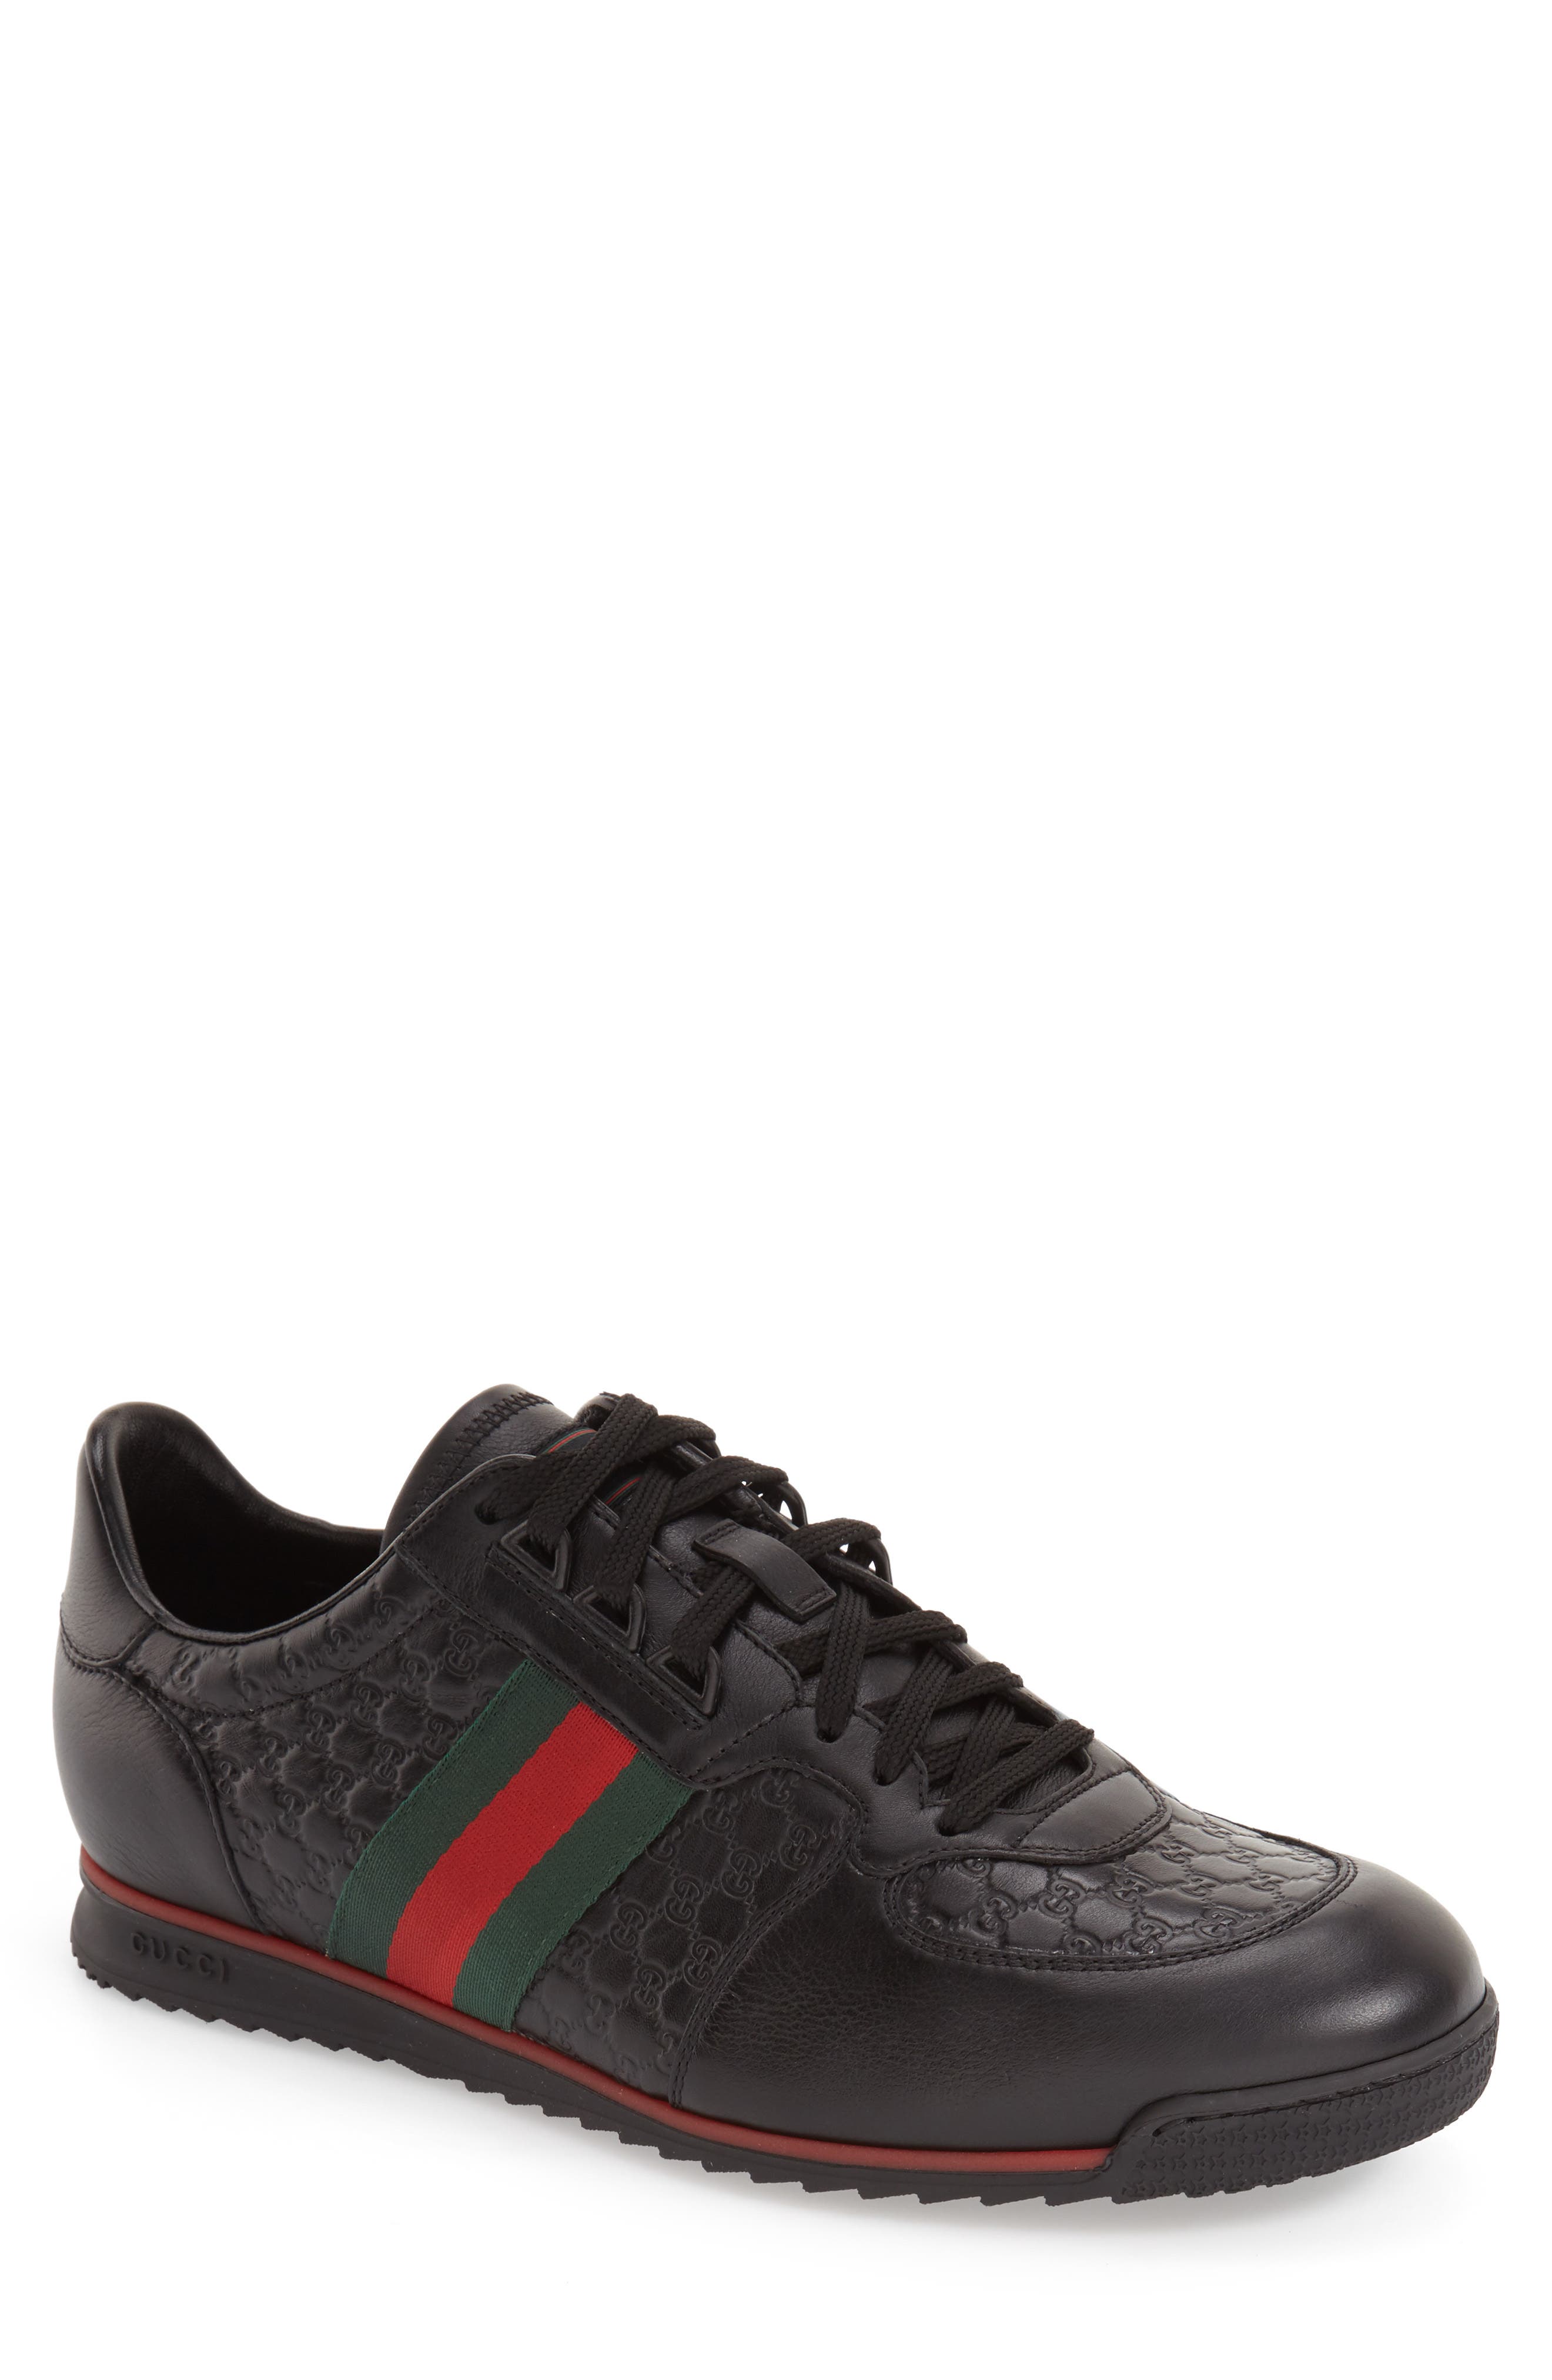 gucci sl73 leather trainers